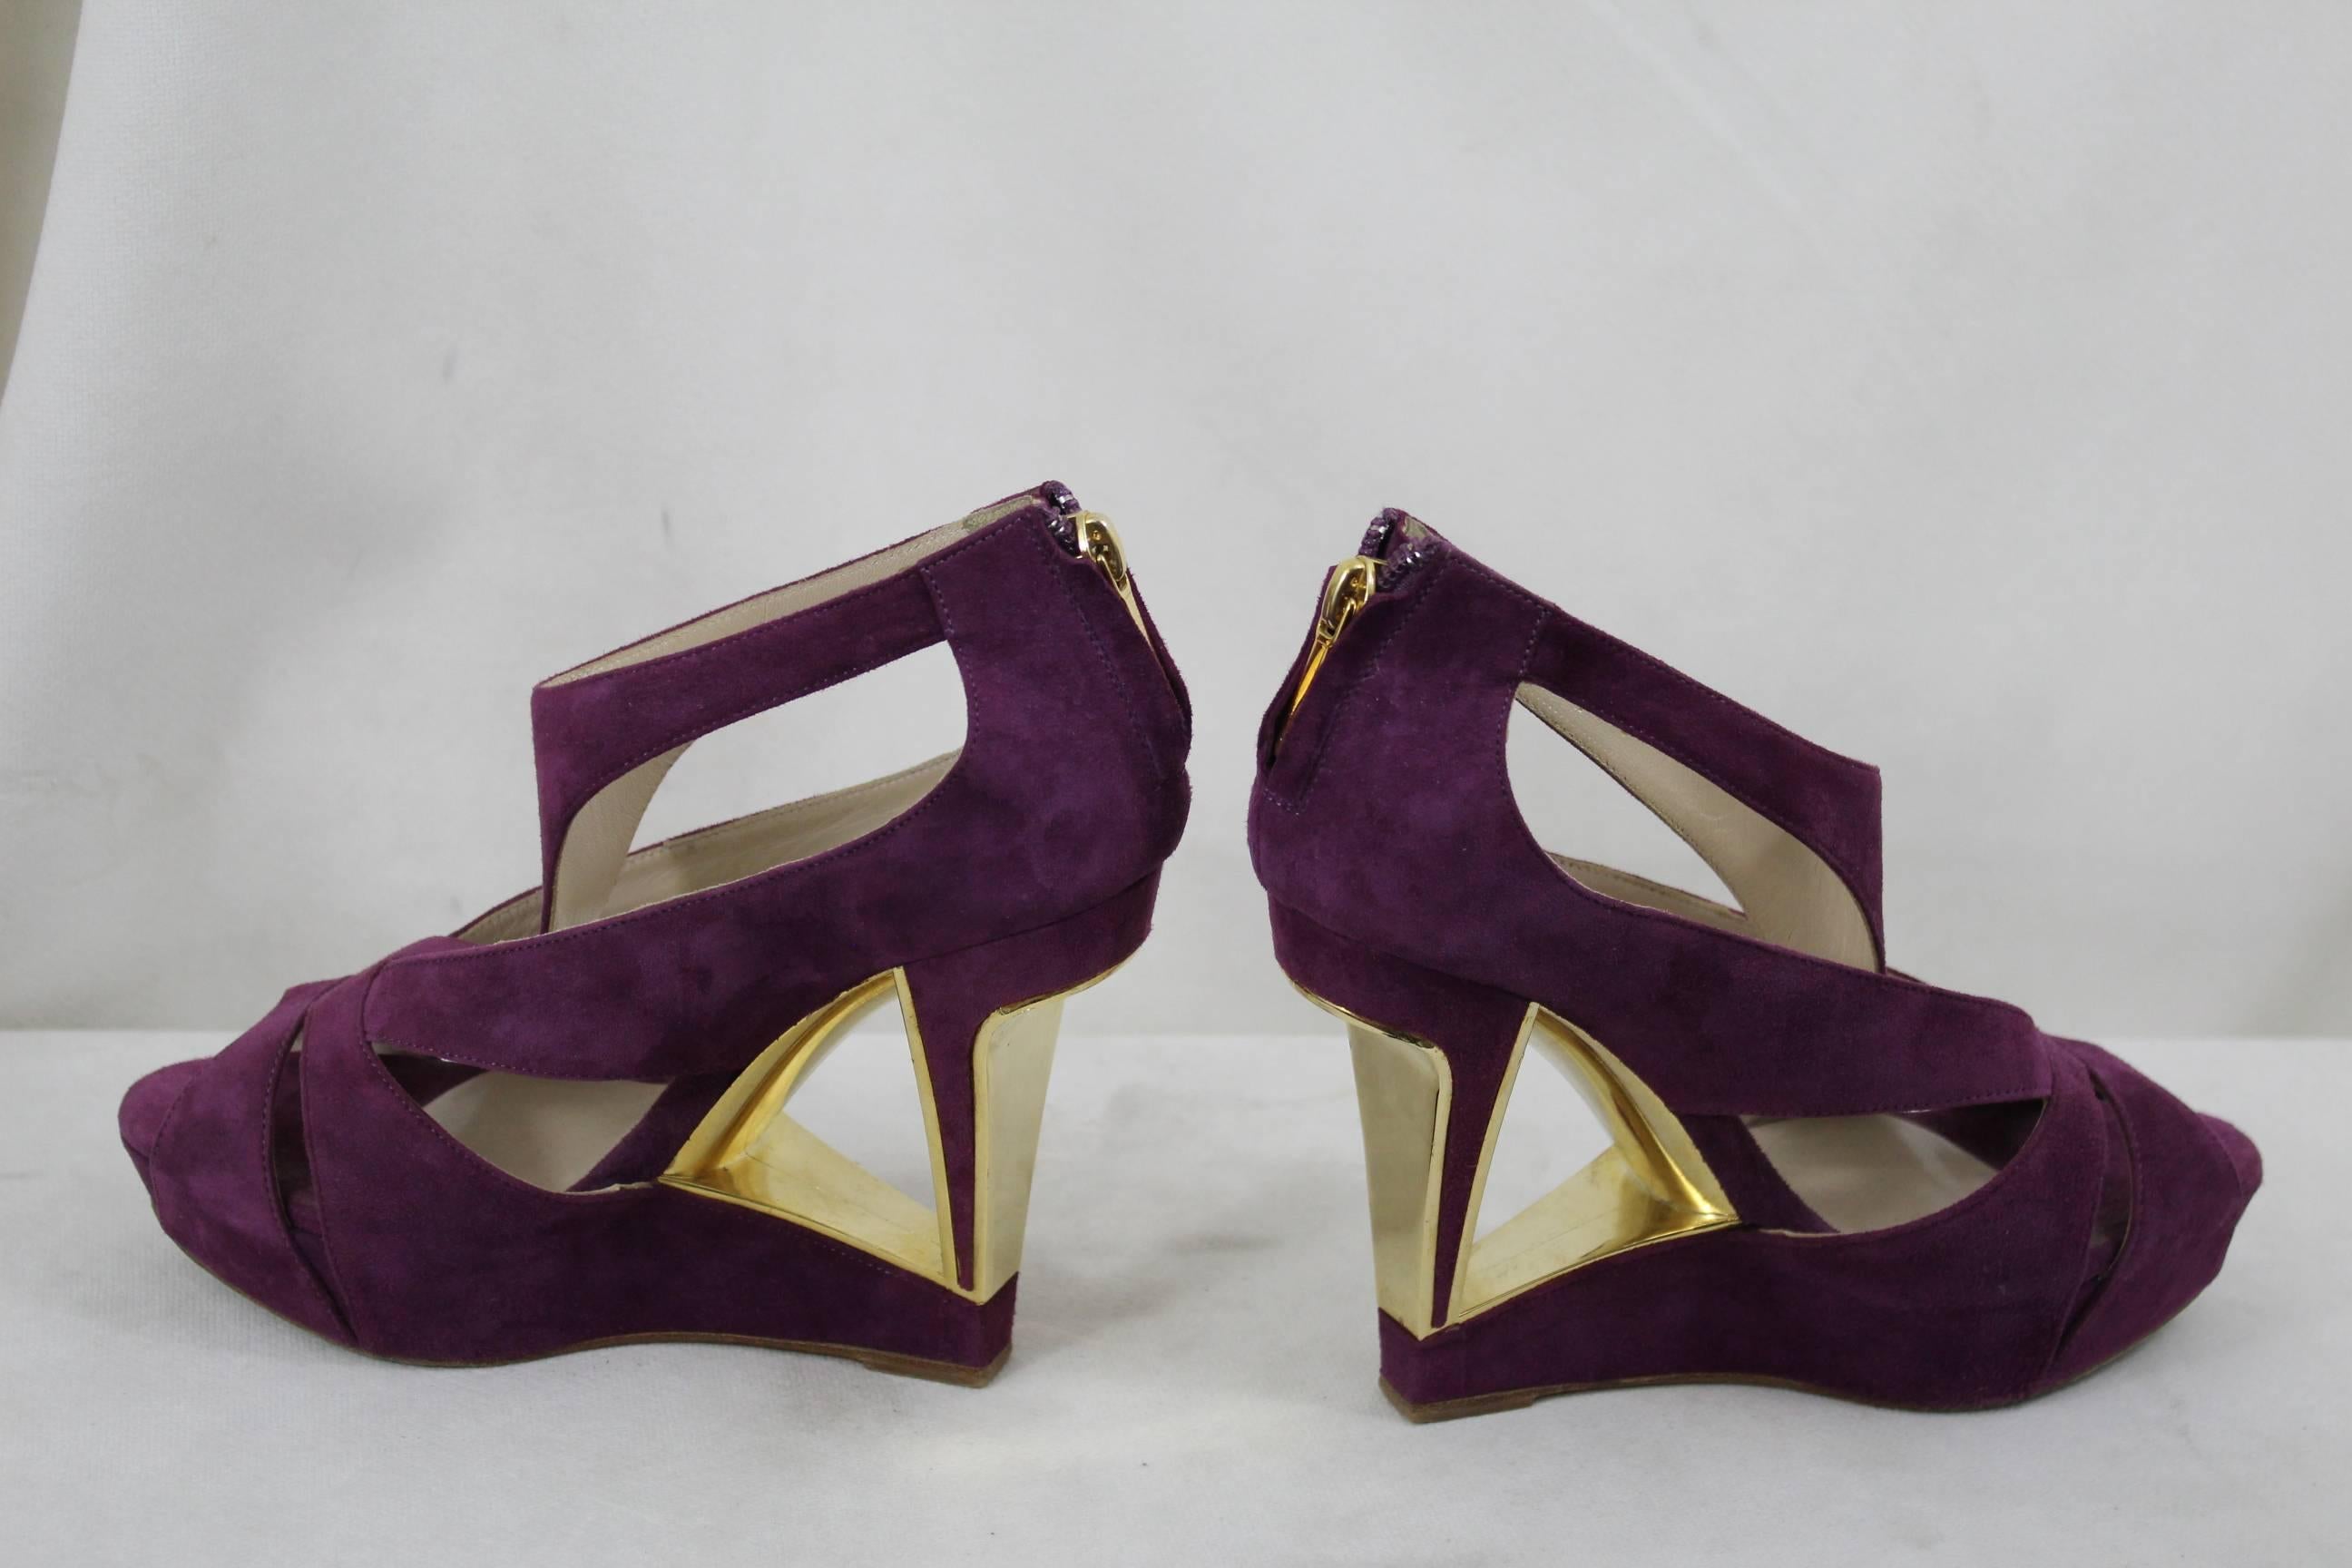 Women's Christian DiorGolden and Purple Architectural Sandals. Size 4 (35 FR) For Sale